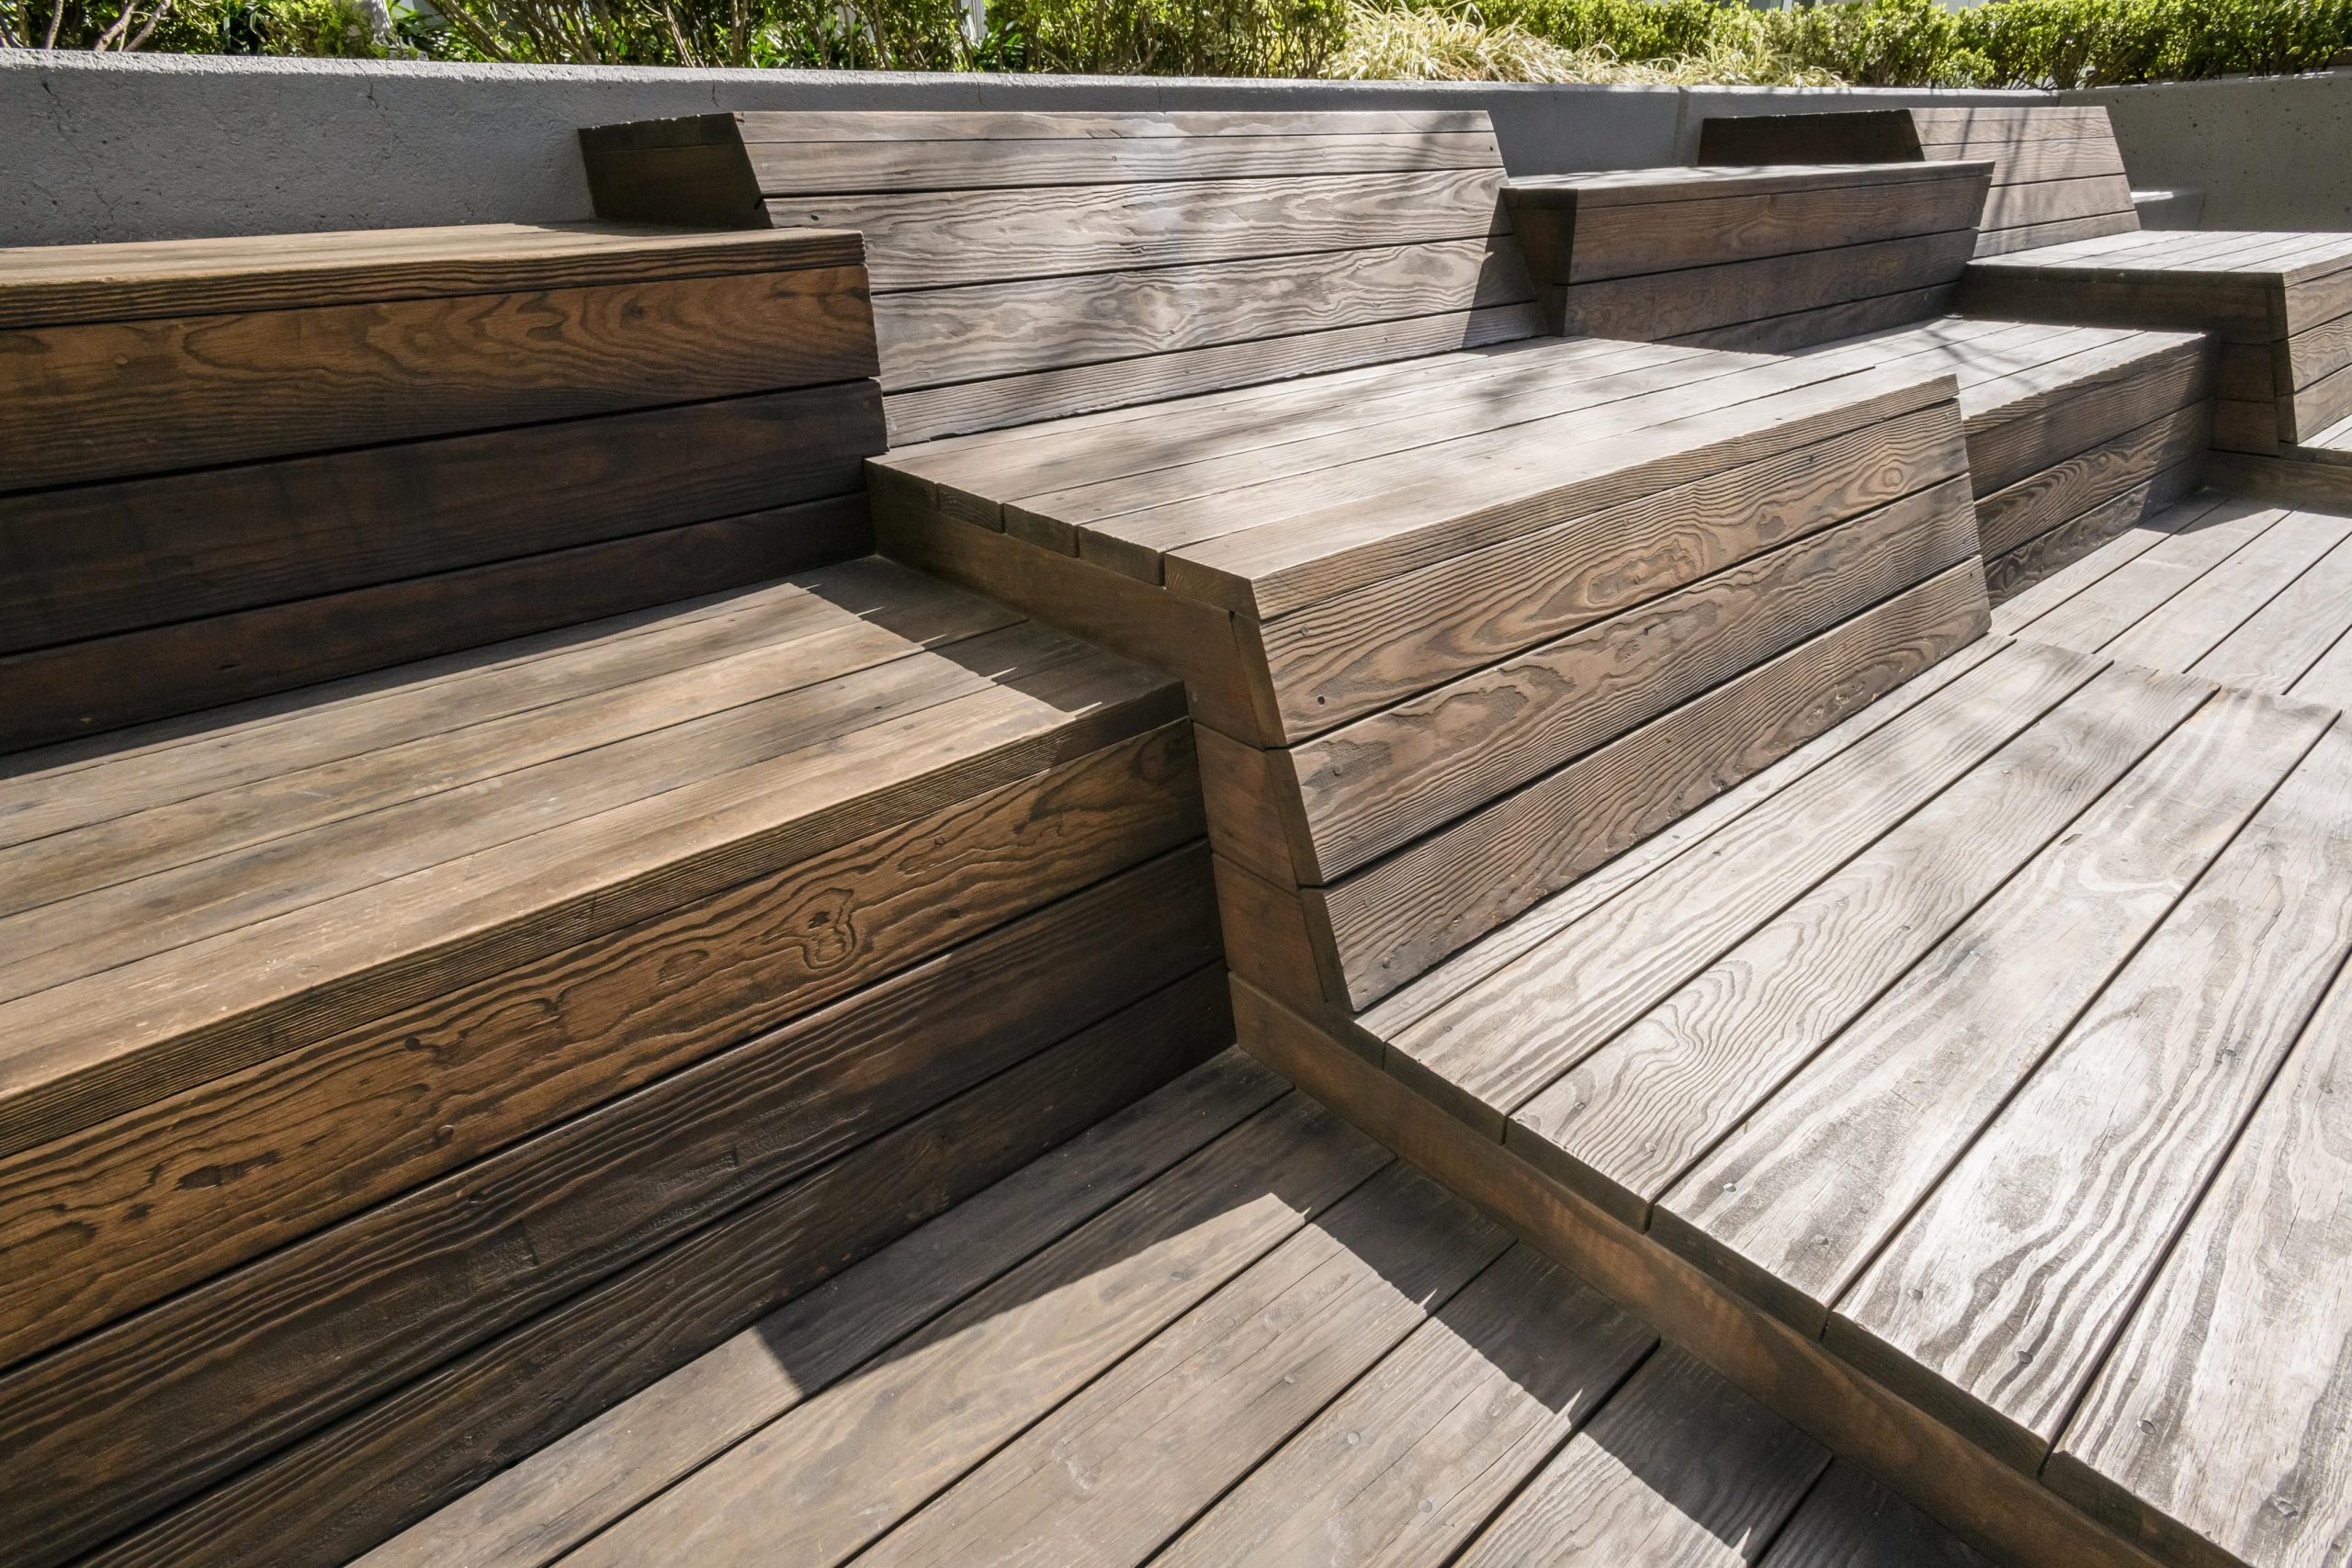 Outside seating area and benches with Kebony© wood.